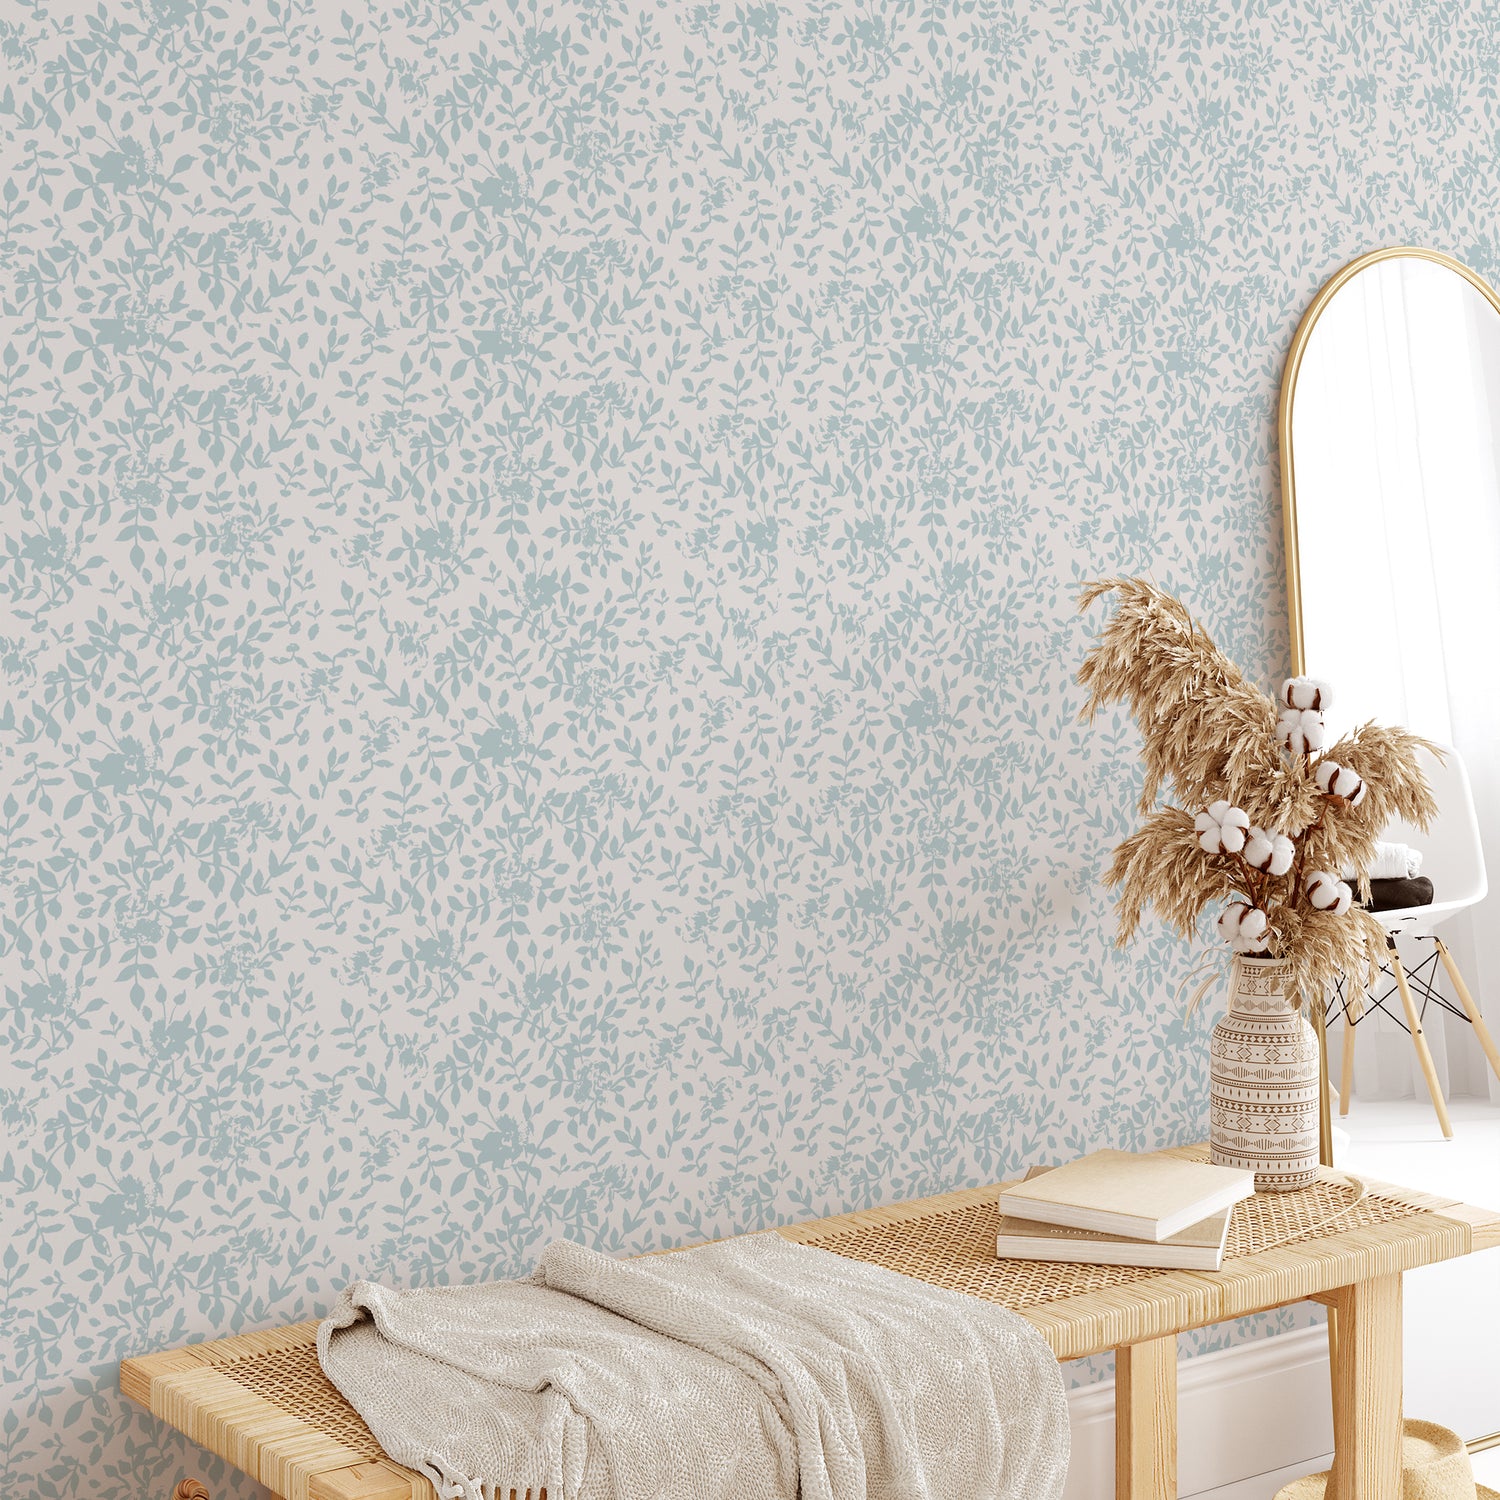 Bedroom wall featuring our Florence Peel and Stick Wallpaper in sky blue and white by Jackie O'Bosky. These floral silhouettes make a beautiful accent wall or statement wall!